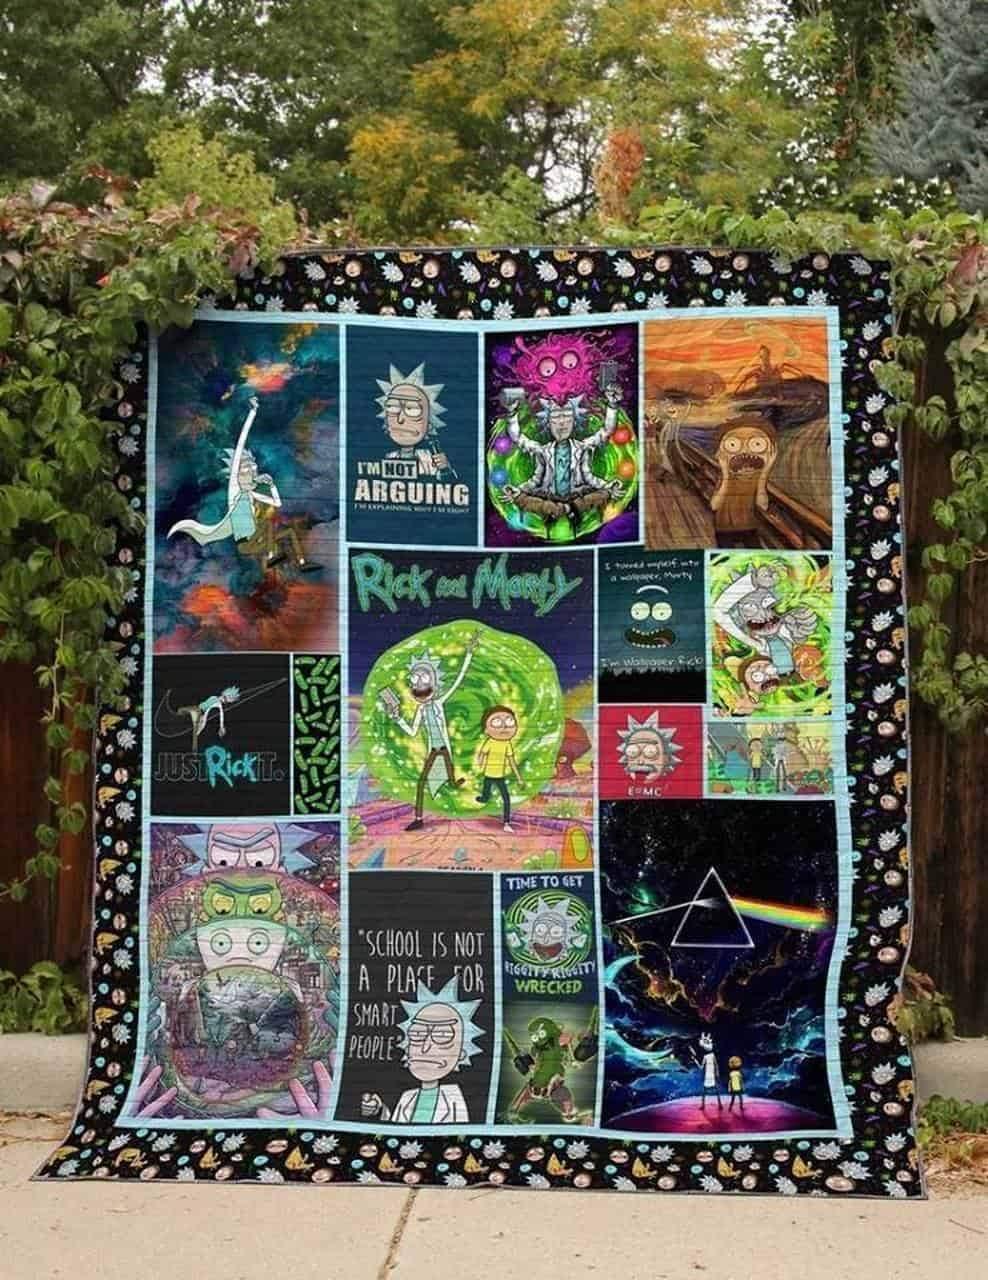 Rick and morty blanket - queen